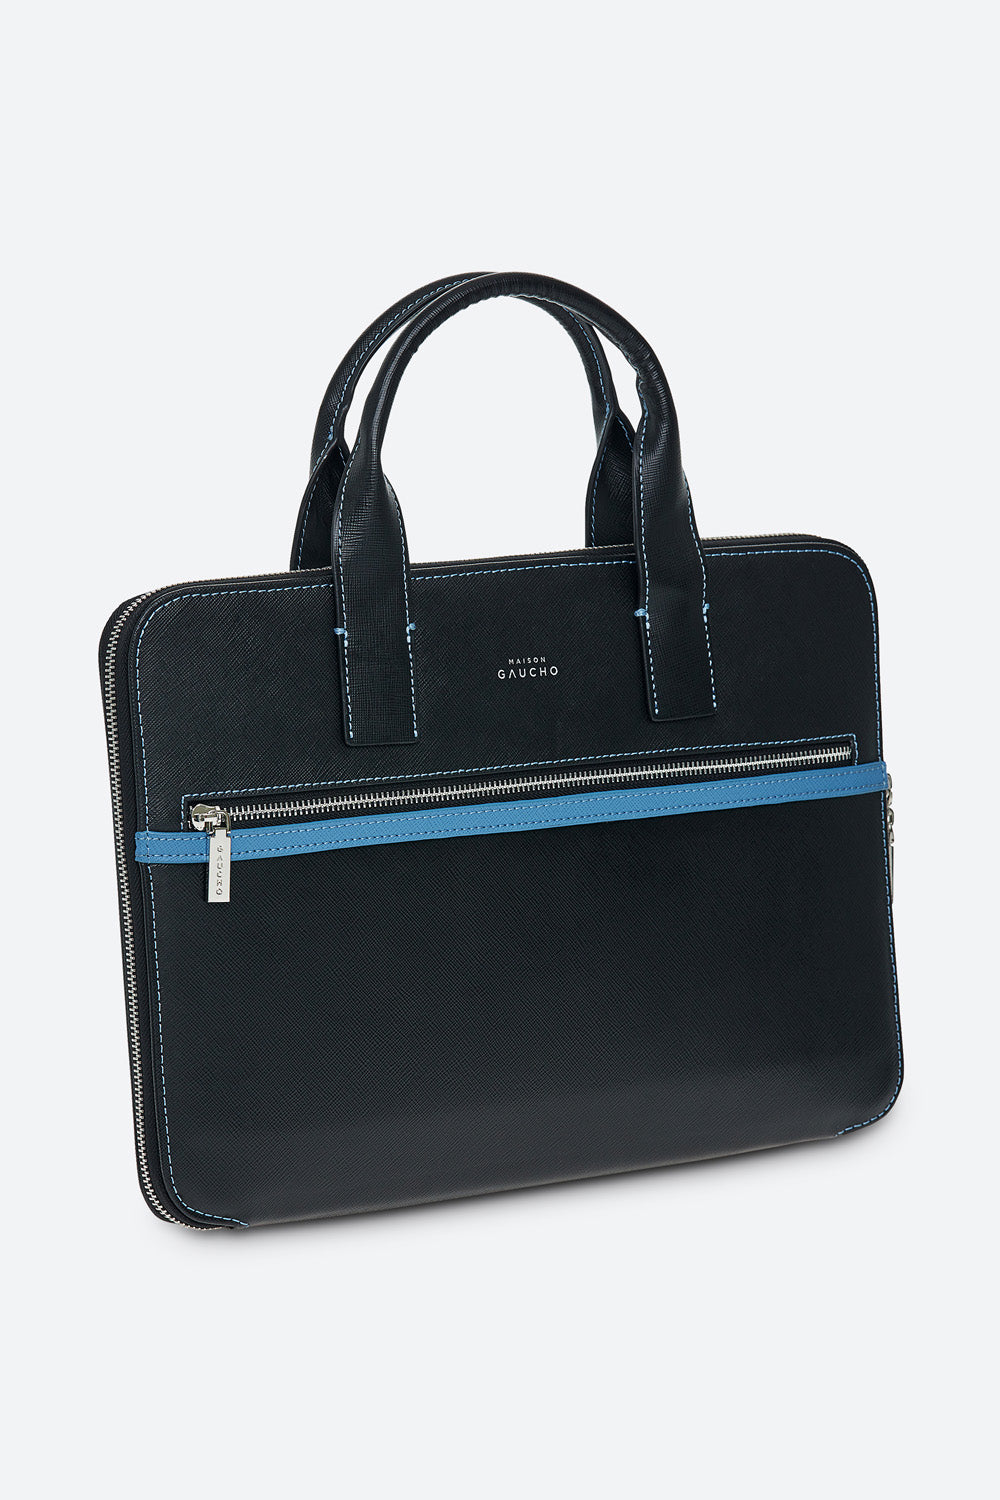 Maison Gaucho Laptop Briefcase, in Black and Light Blue